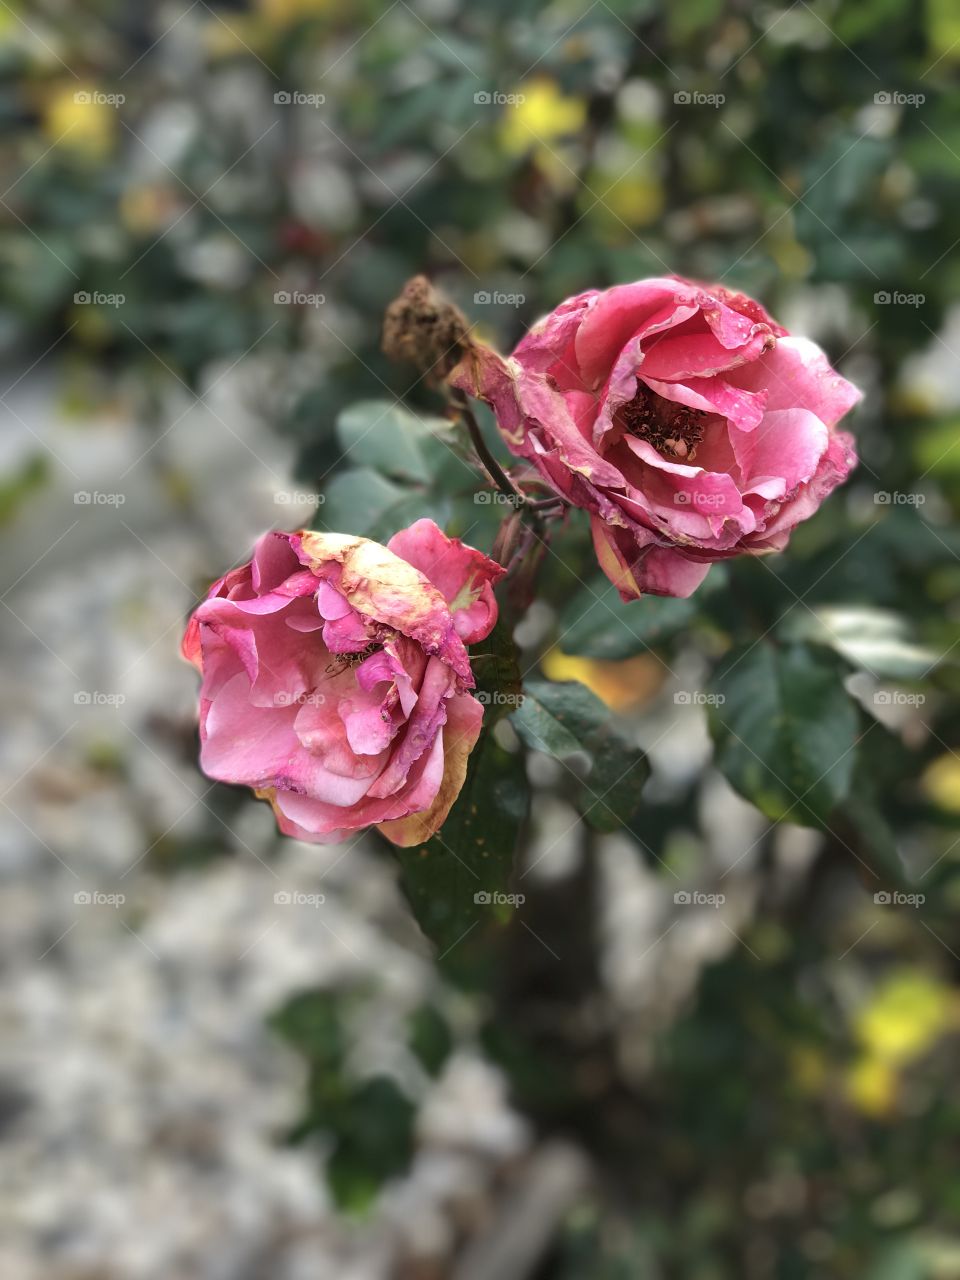 Winter Roses dying